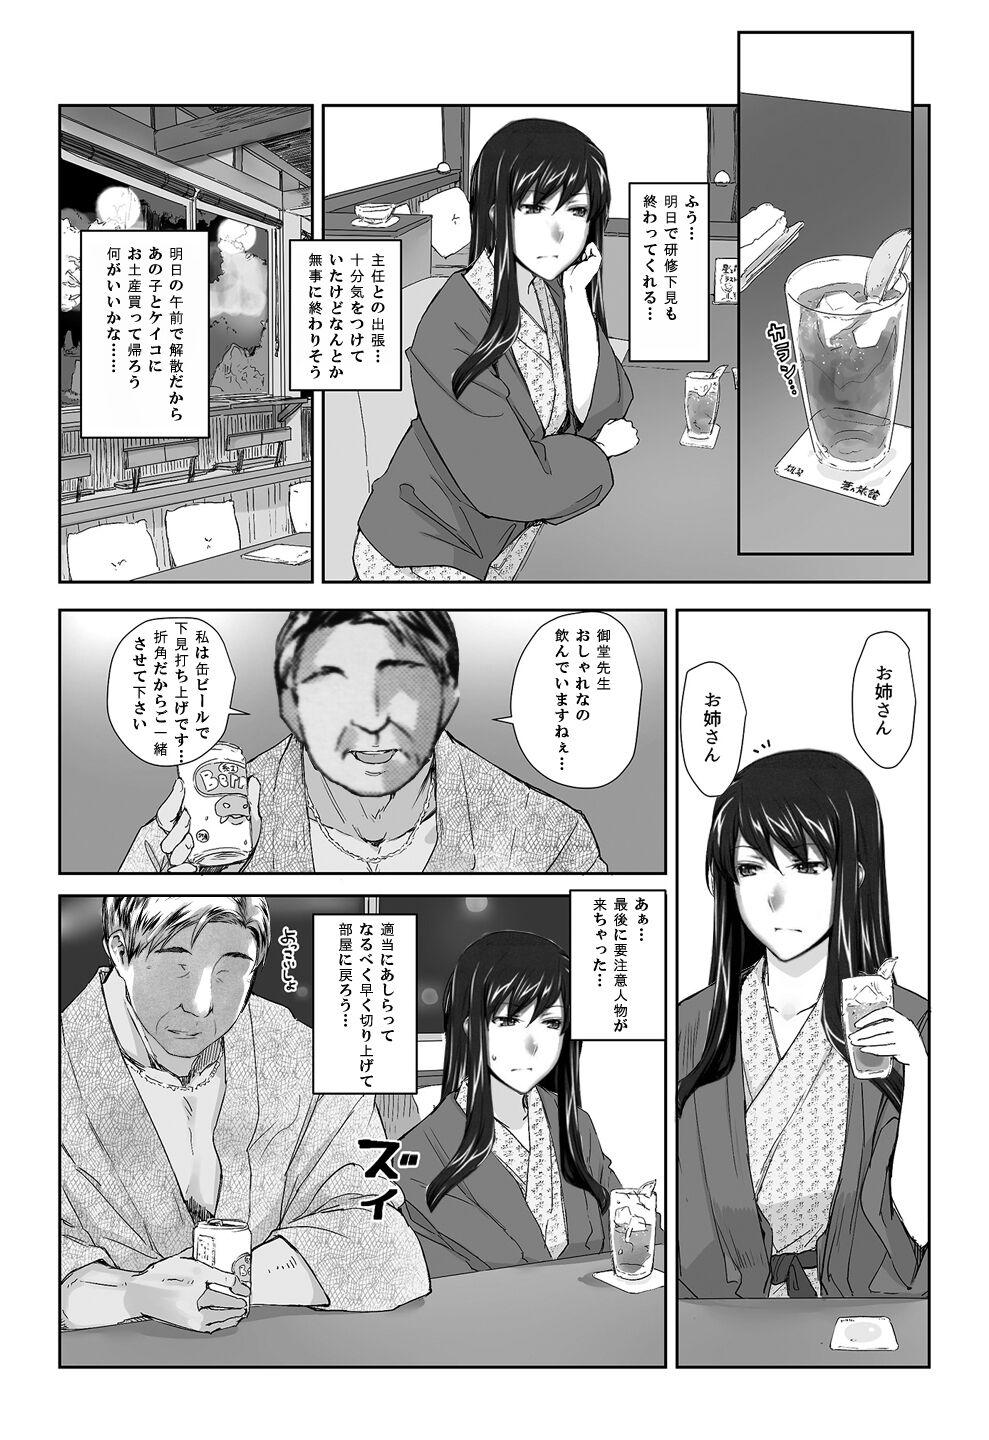 Sakiko-san in delusion Vol.8 ~Sakiko-san's circumstance at an educational training Route3~ (collage) (Continue to “First day of study trip” (page 42) of Vol.1) 2